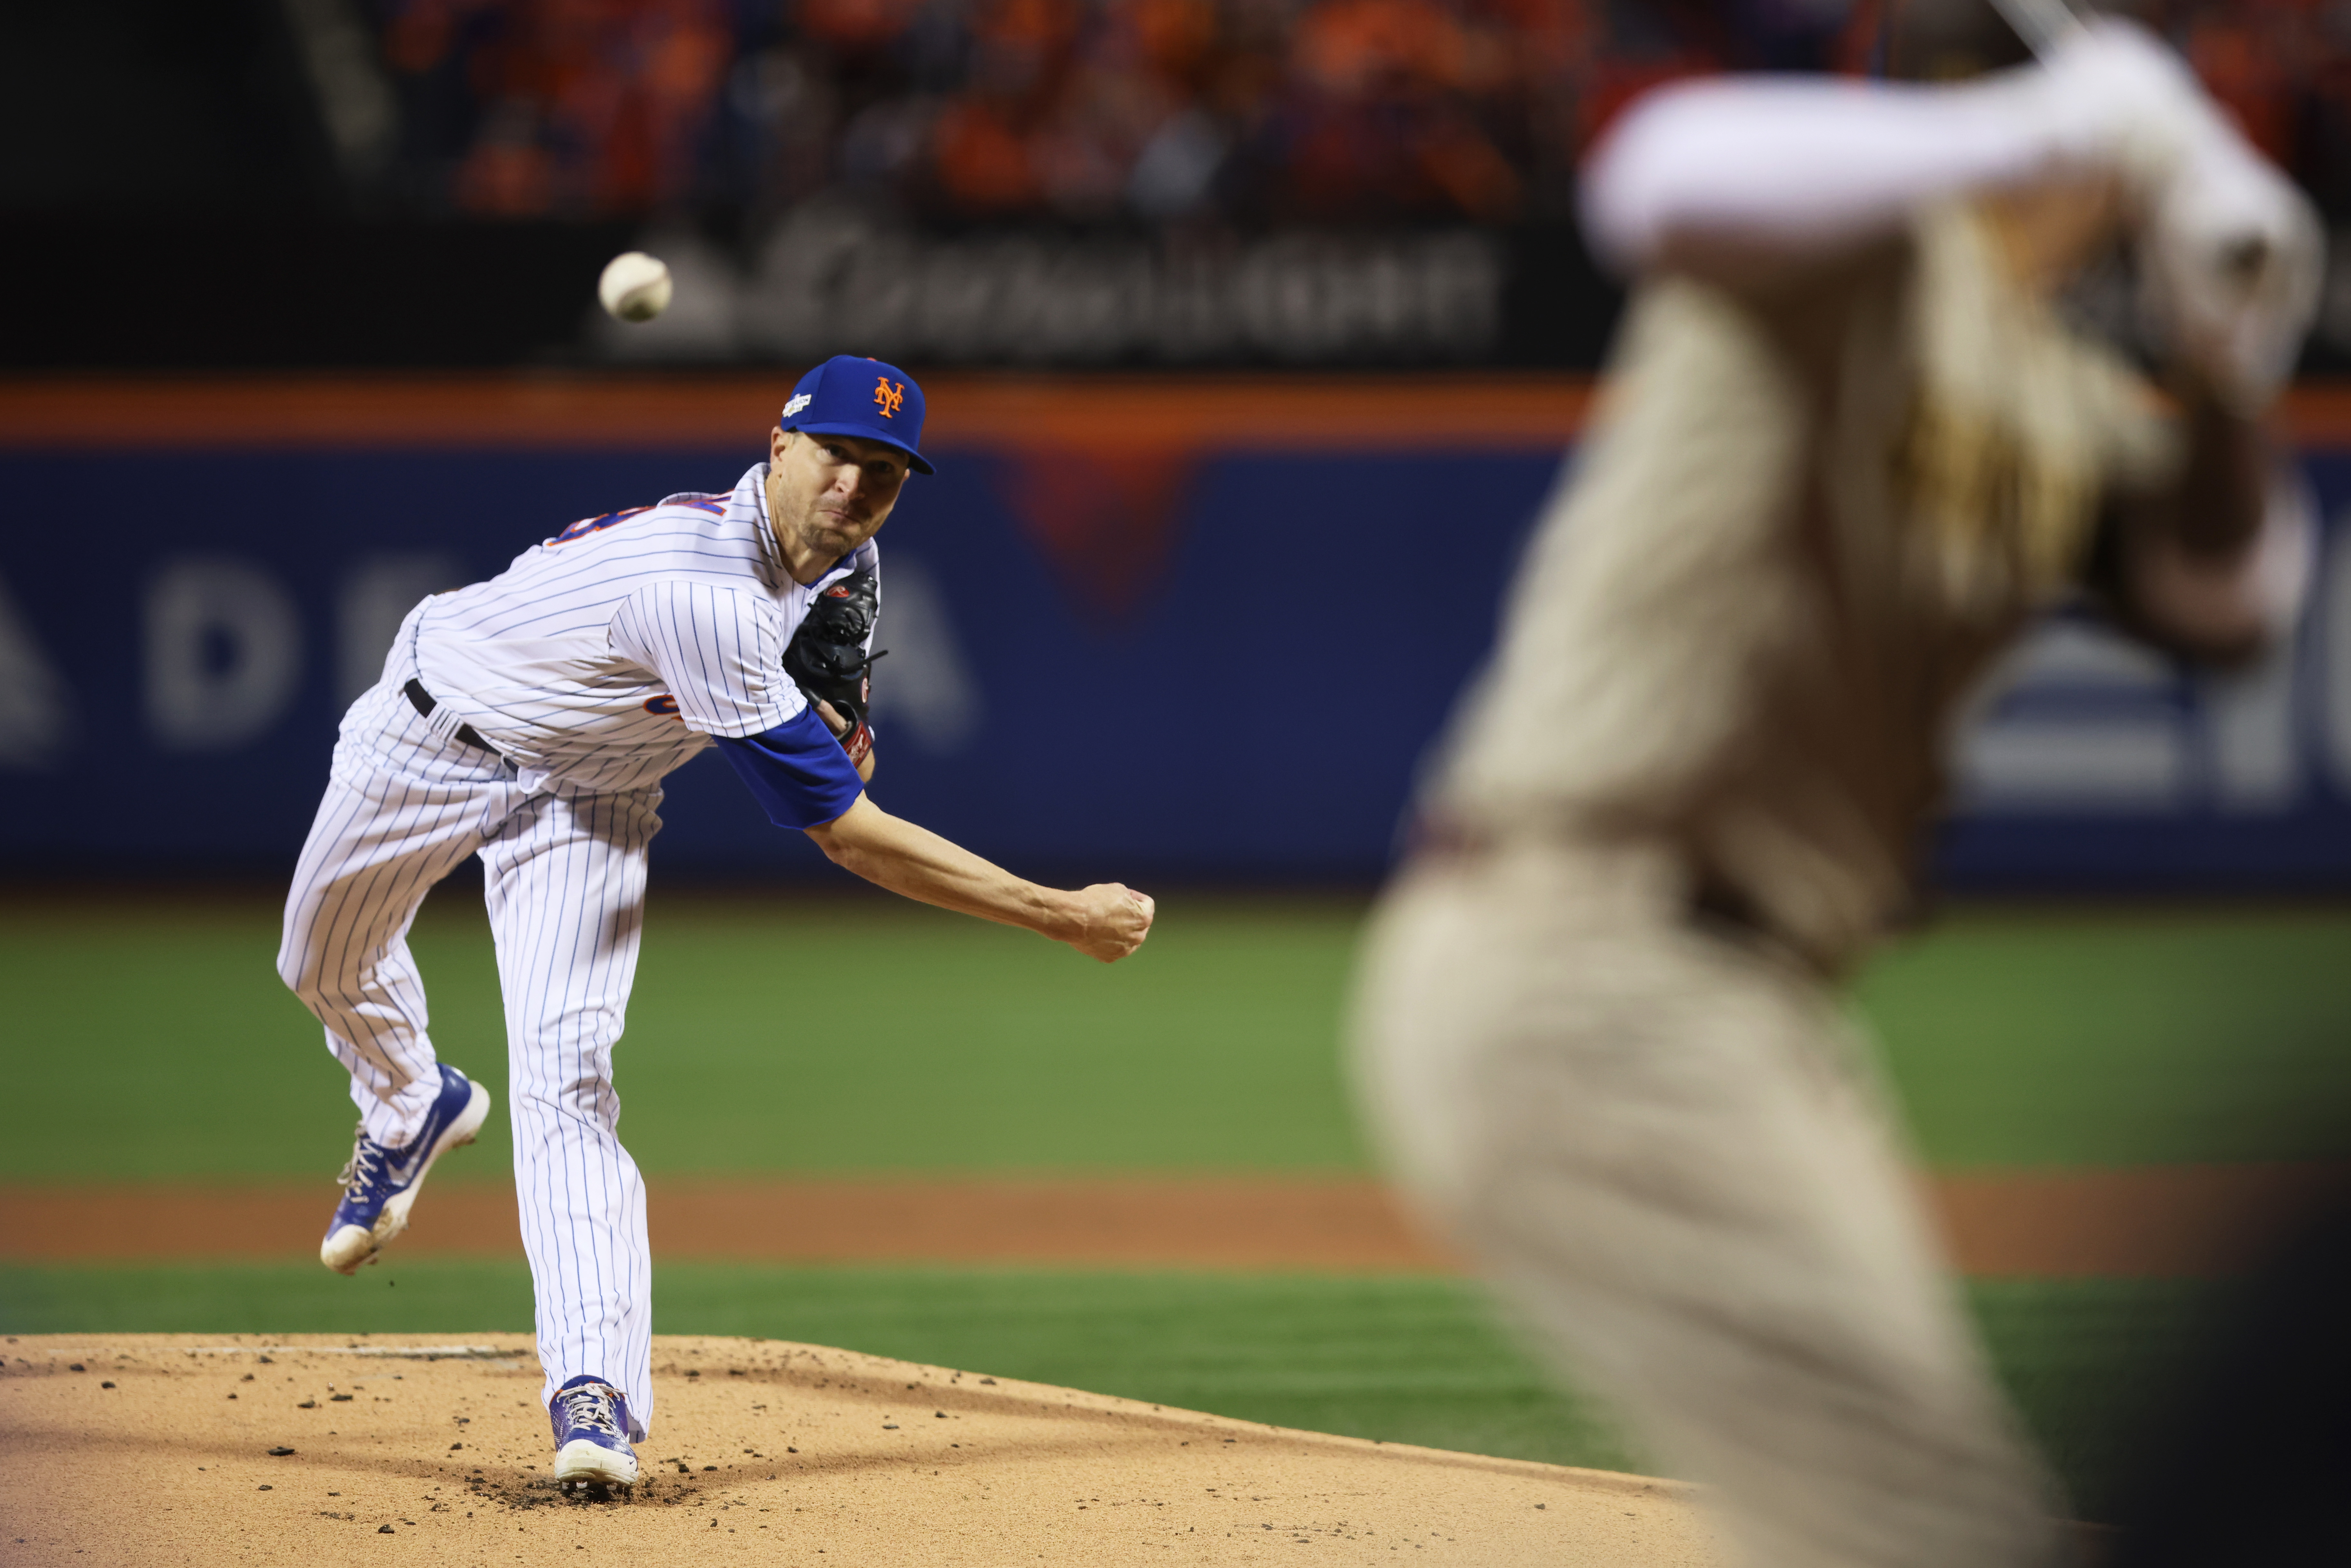 Pitcher Jacob deGrom competes in Game 2 of the MLB National League Wild Card Series against the San Diego Padres at Citi Field in New York City, October 8, 2022. /CFP